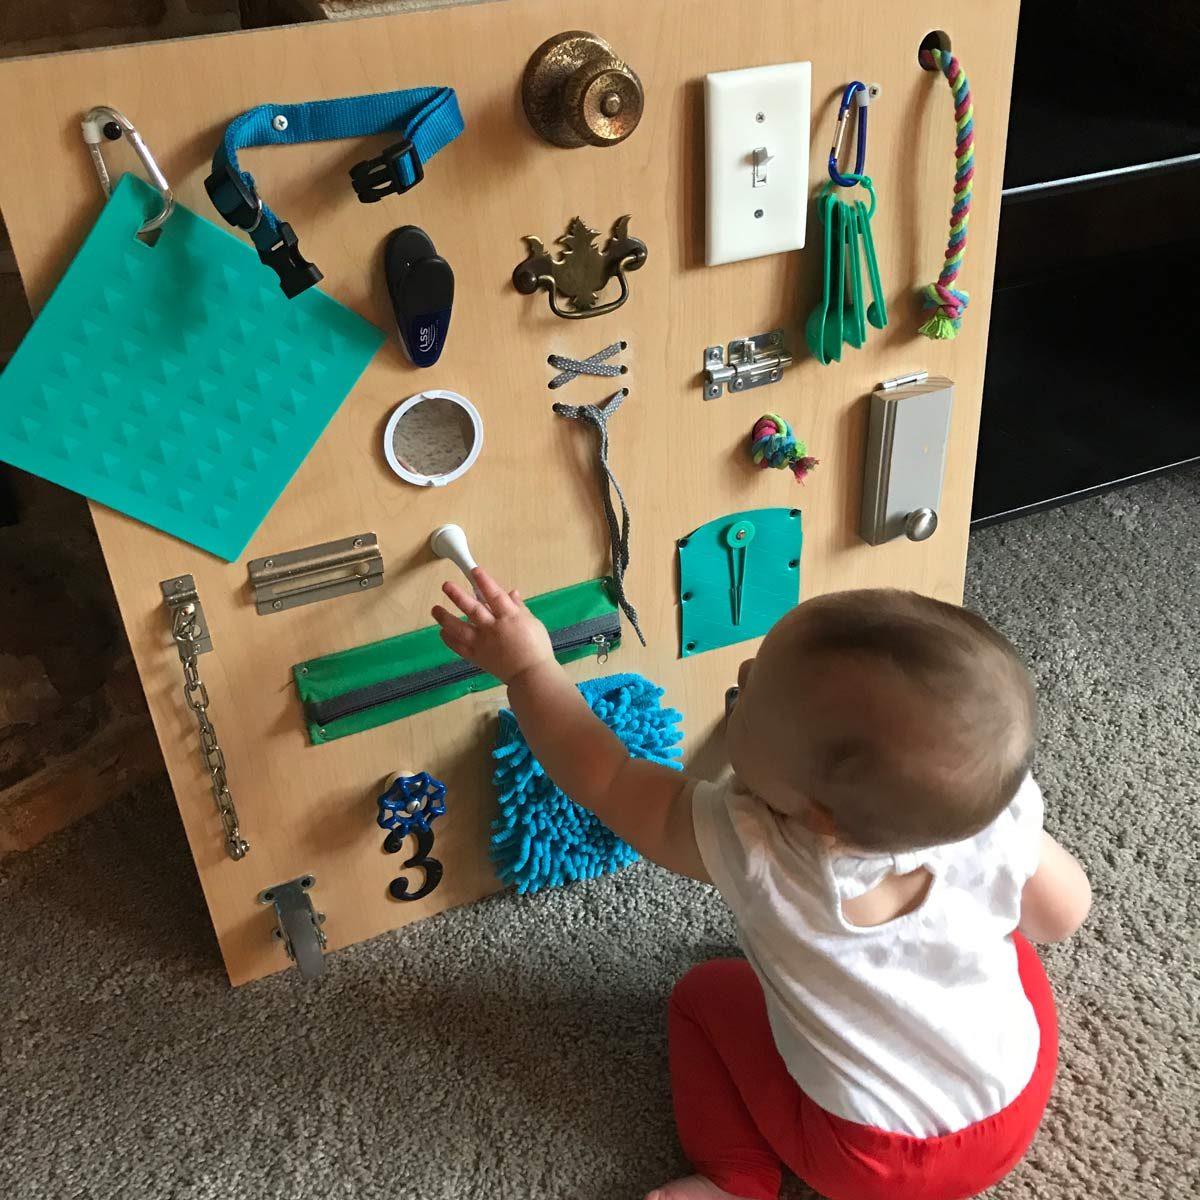 DIY Montessori Lego table and storage system - DIY projects plans